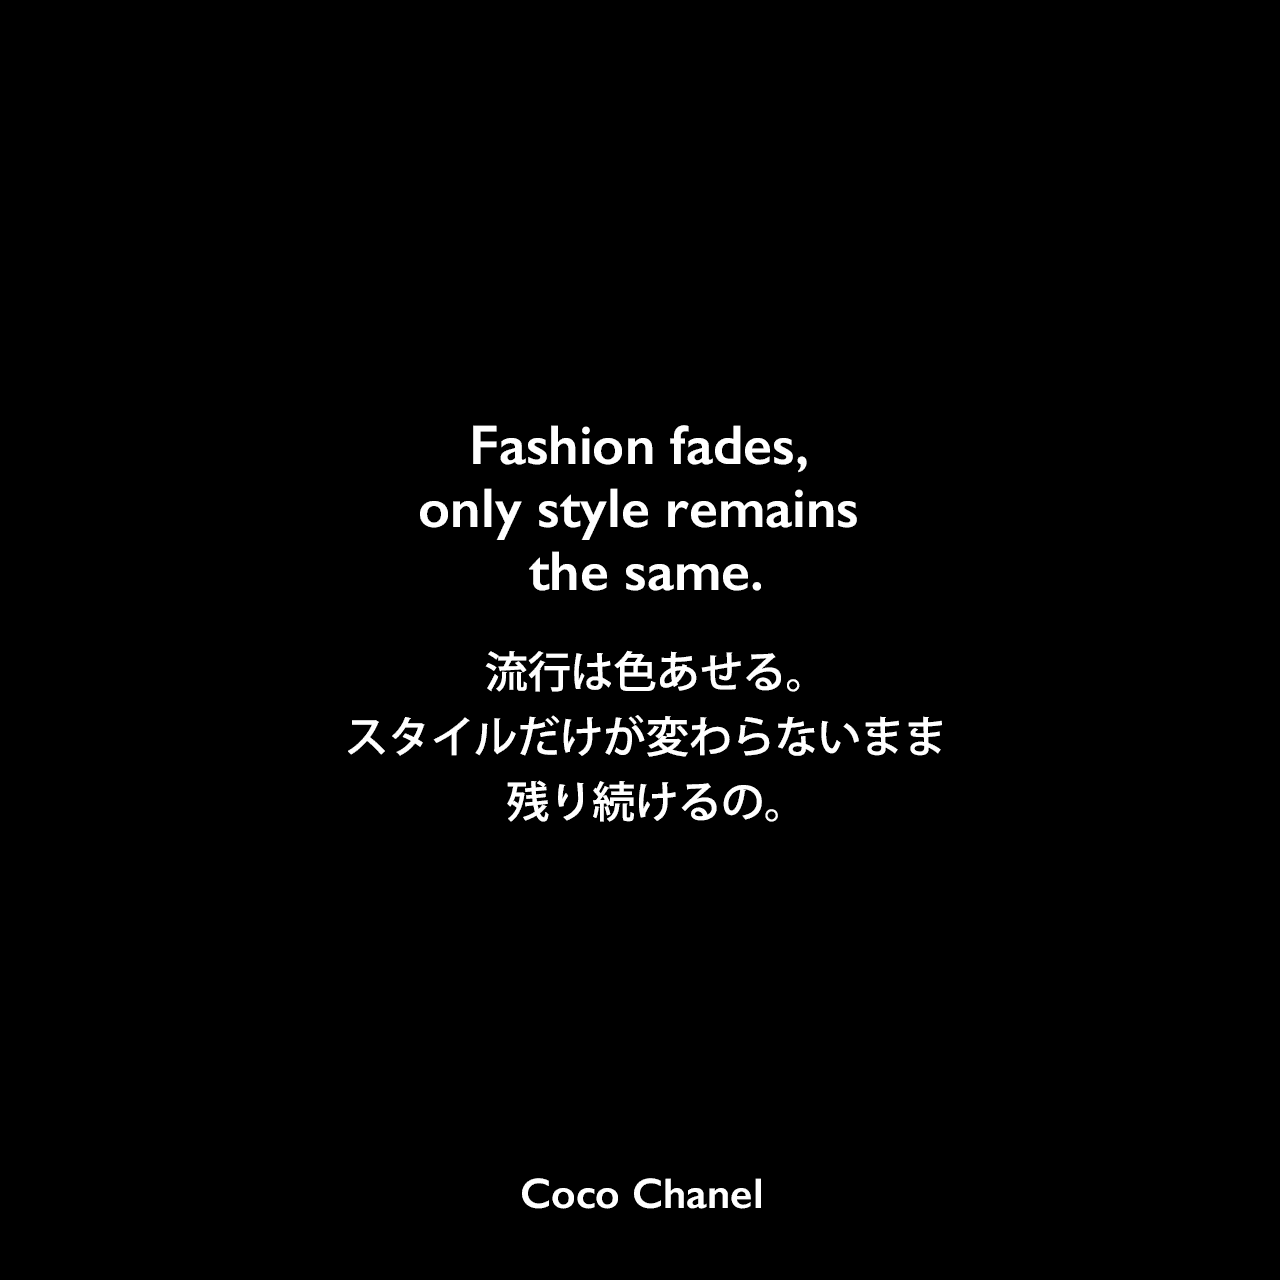 Fashion fades, only style remains the same.流行は色あせる。スタイルだけが変わらないまま残り続けるの。- 「Architectural Digest (September 1994) 」よりCoco Chanel